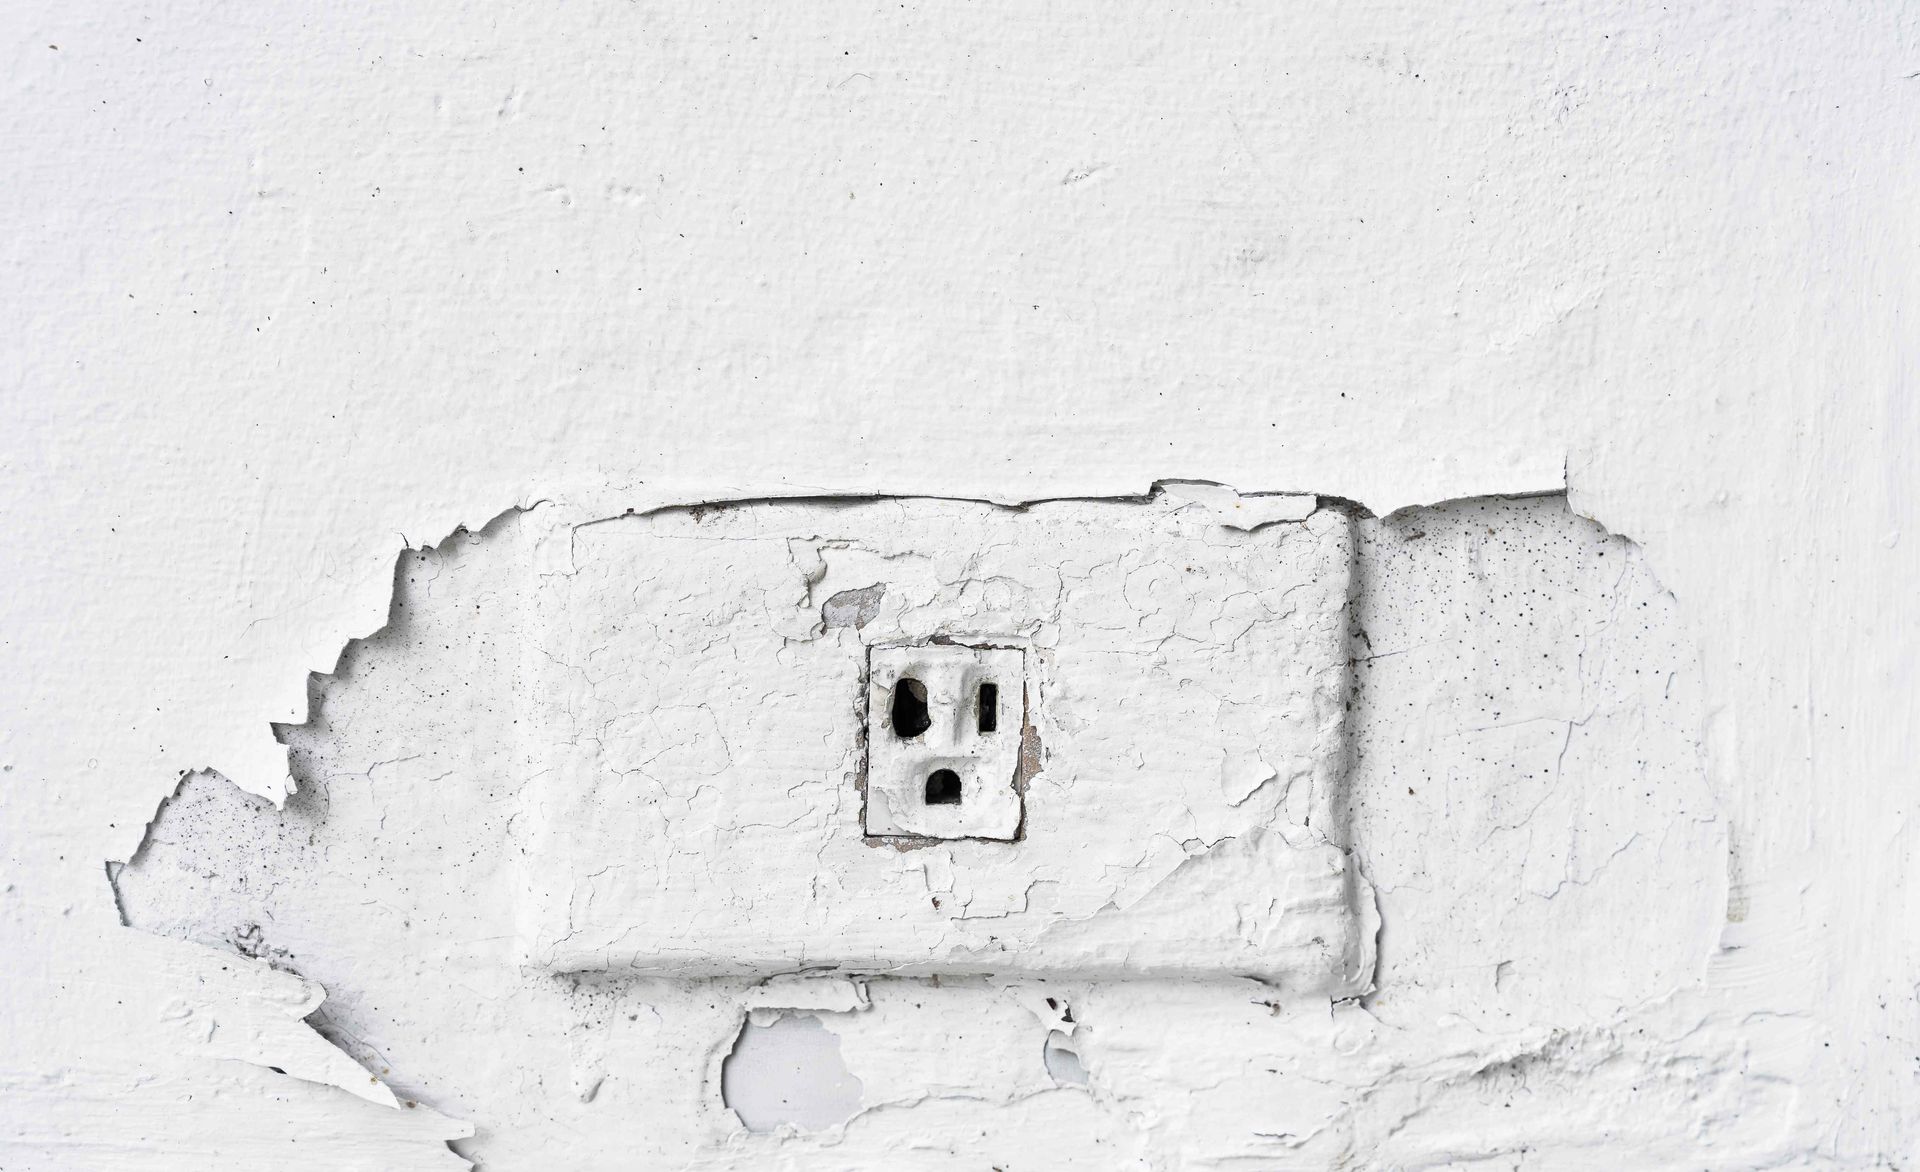 Old Electrical Outlet In Need Of Replacement and Affordable Electrical Rewiring